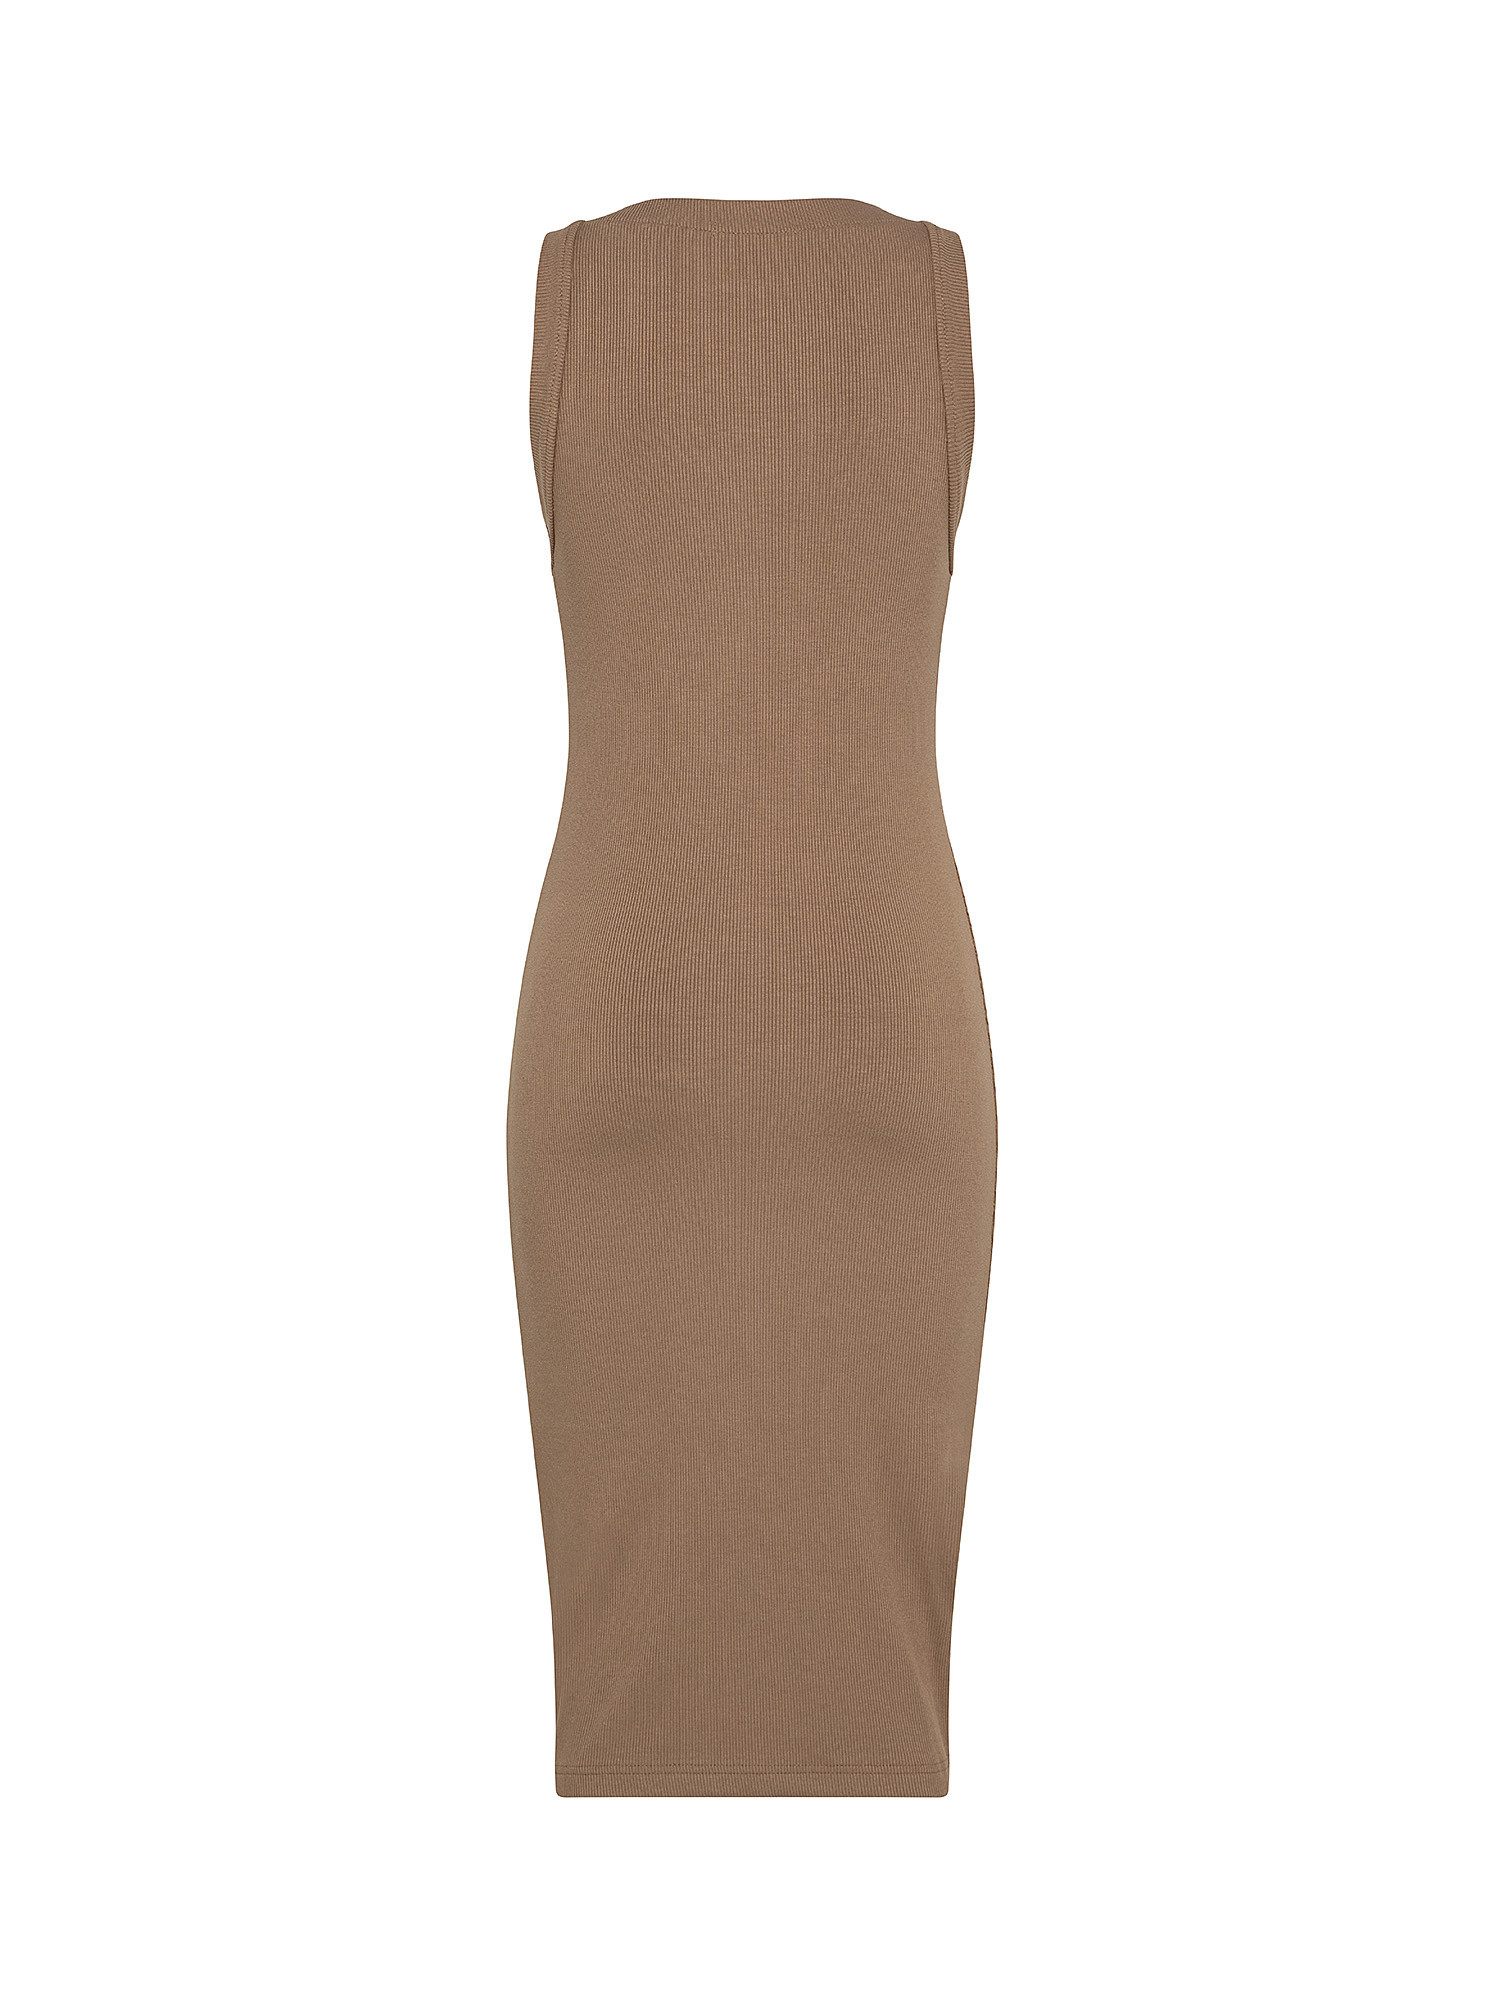 Abito costine bodycon, Beige scuro, large image number 1